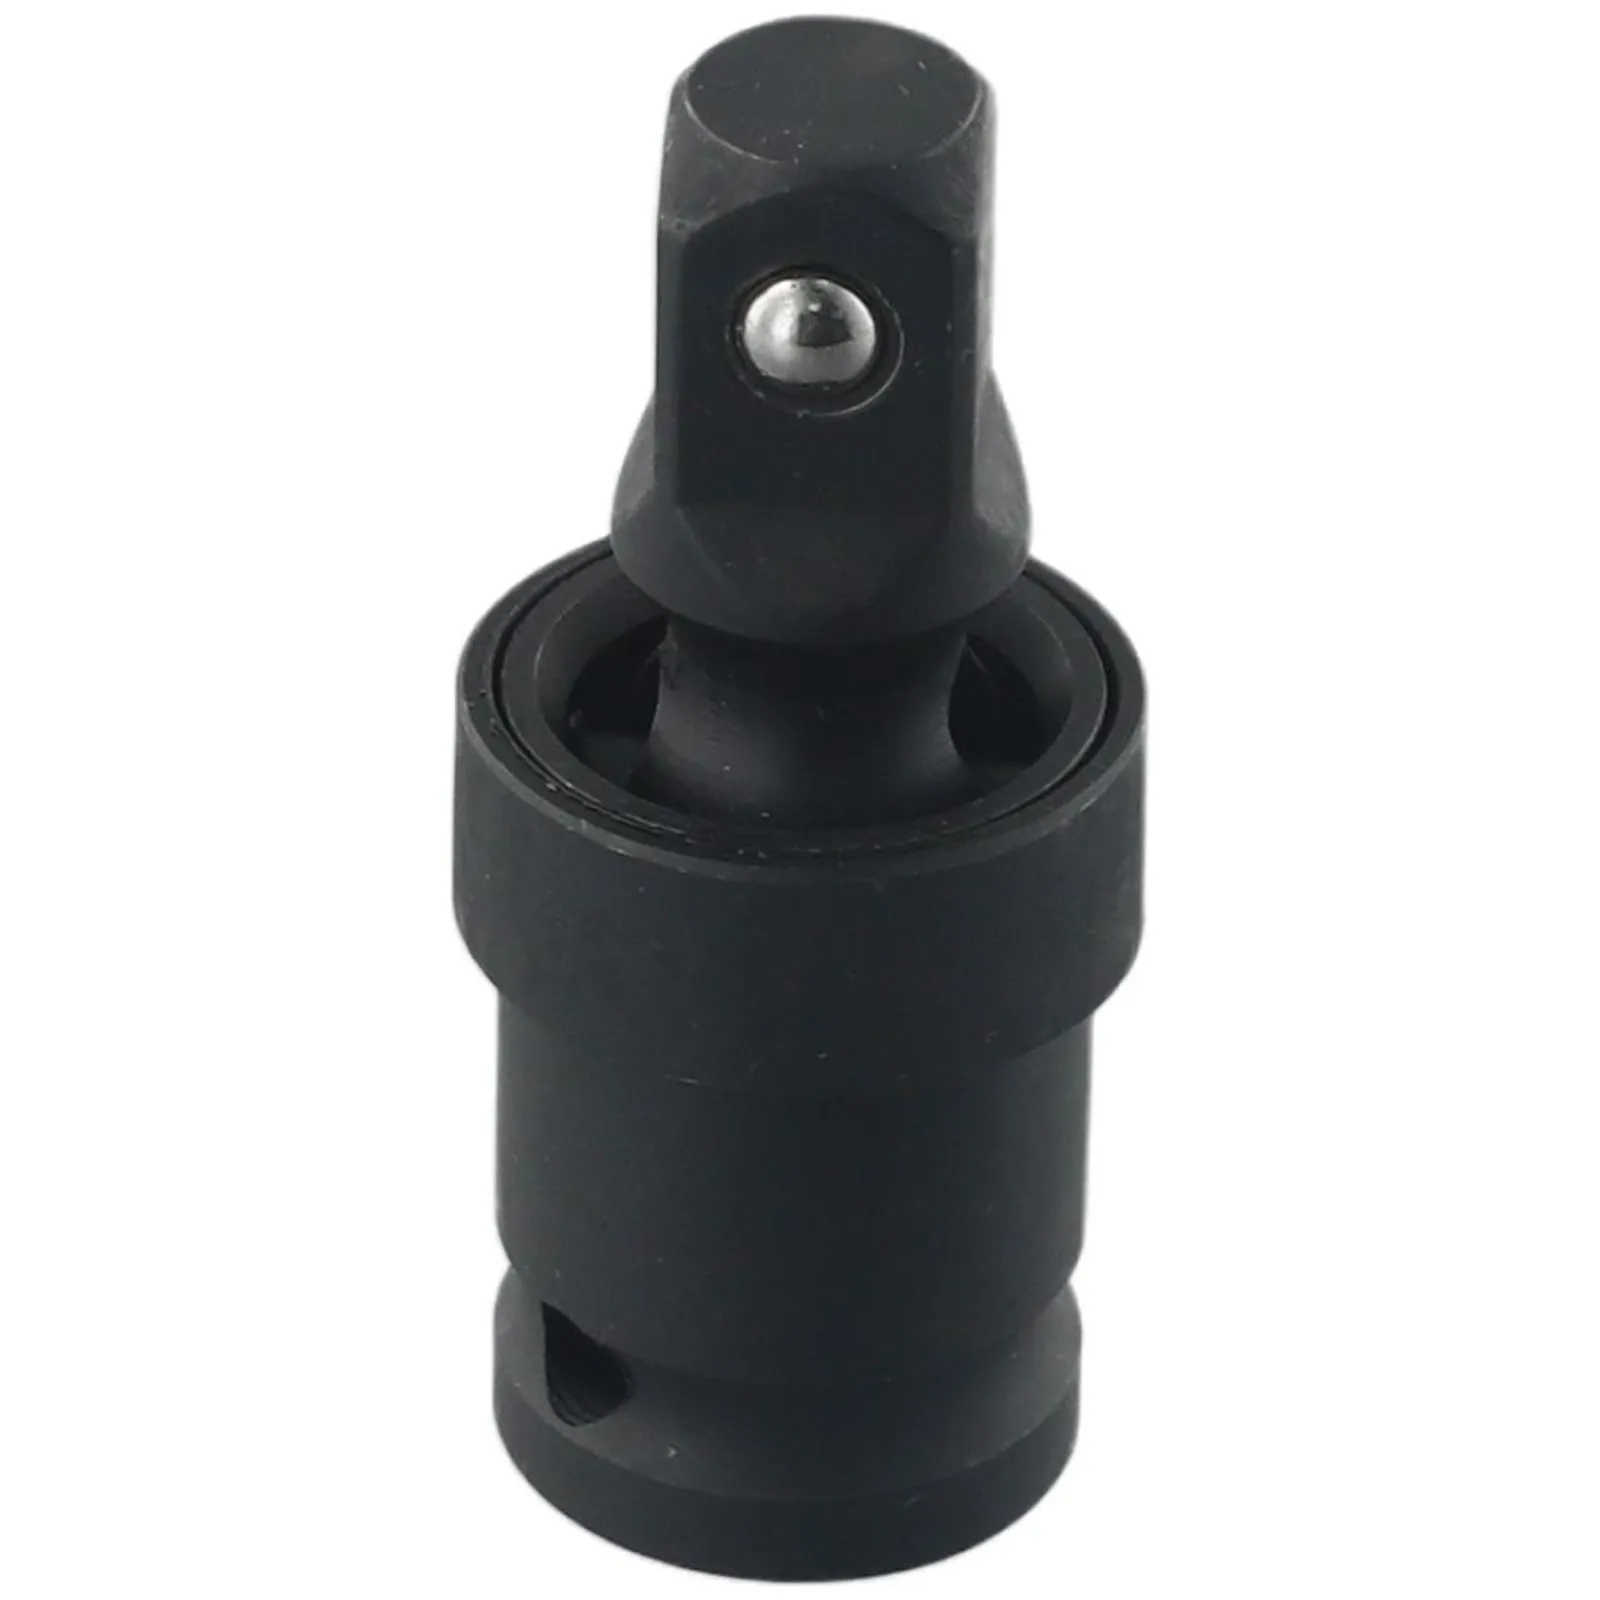 Drive Joint High Quality Black Phosphate Coated 1/2 Pneumatic Universal Joint 360 Degree Swivel Socket Adapter high quality lower ball and socket joint universal auto used for toyota oe 43330 29425 43330 49055 43330 09670